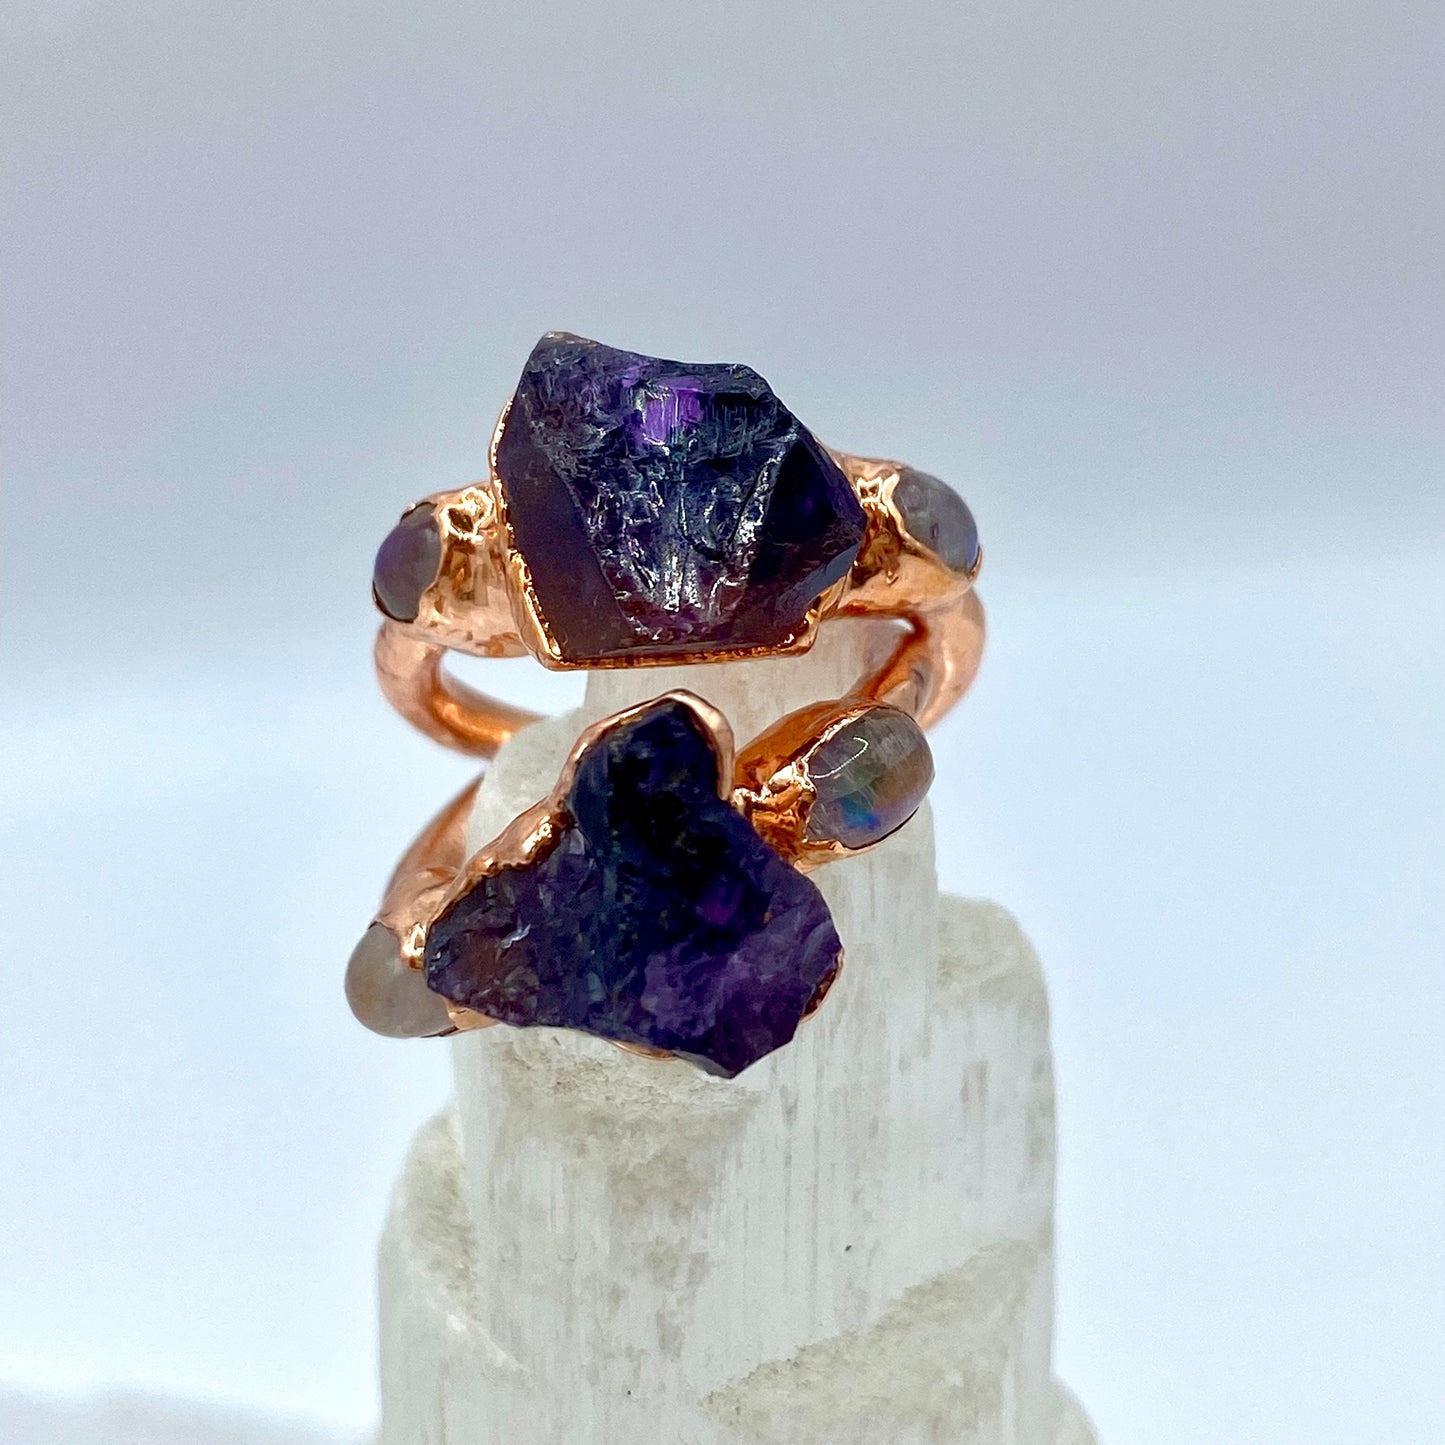 Amethyst Crystal Ring Copper Electroformed in Rose Gold with Moonstone, Gemstone Jewelry Gift for Her